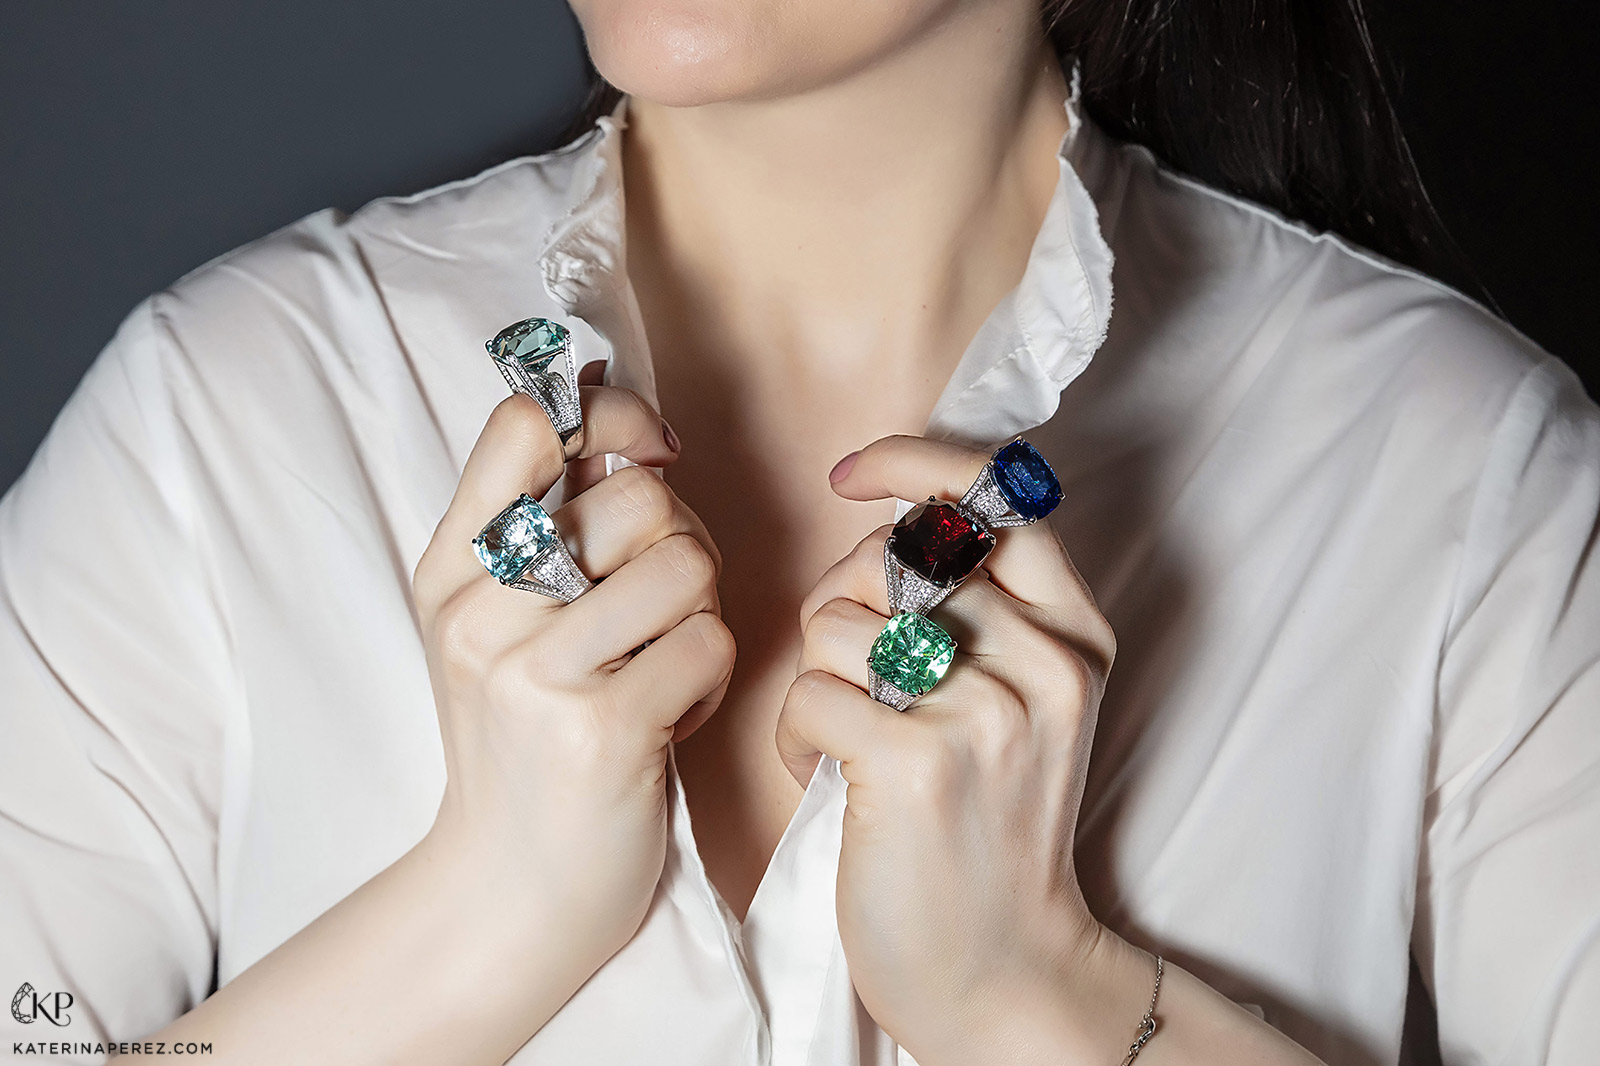 Alexander Laut 'Infinite Kiss' collection rings with 28ct and 39ct aquamarines, 24ct Burmese sapphire, 52ct spessartite garnet, 27ct tourmaline, all with diamonds 